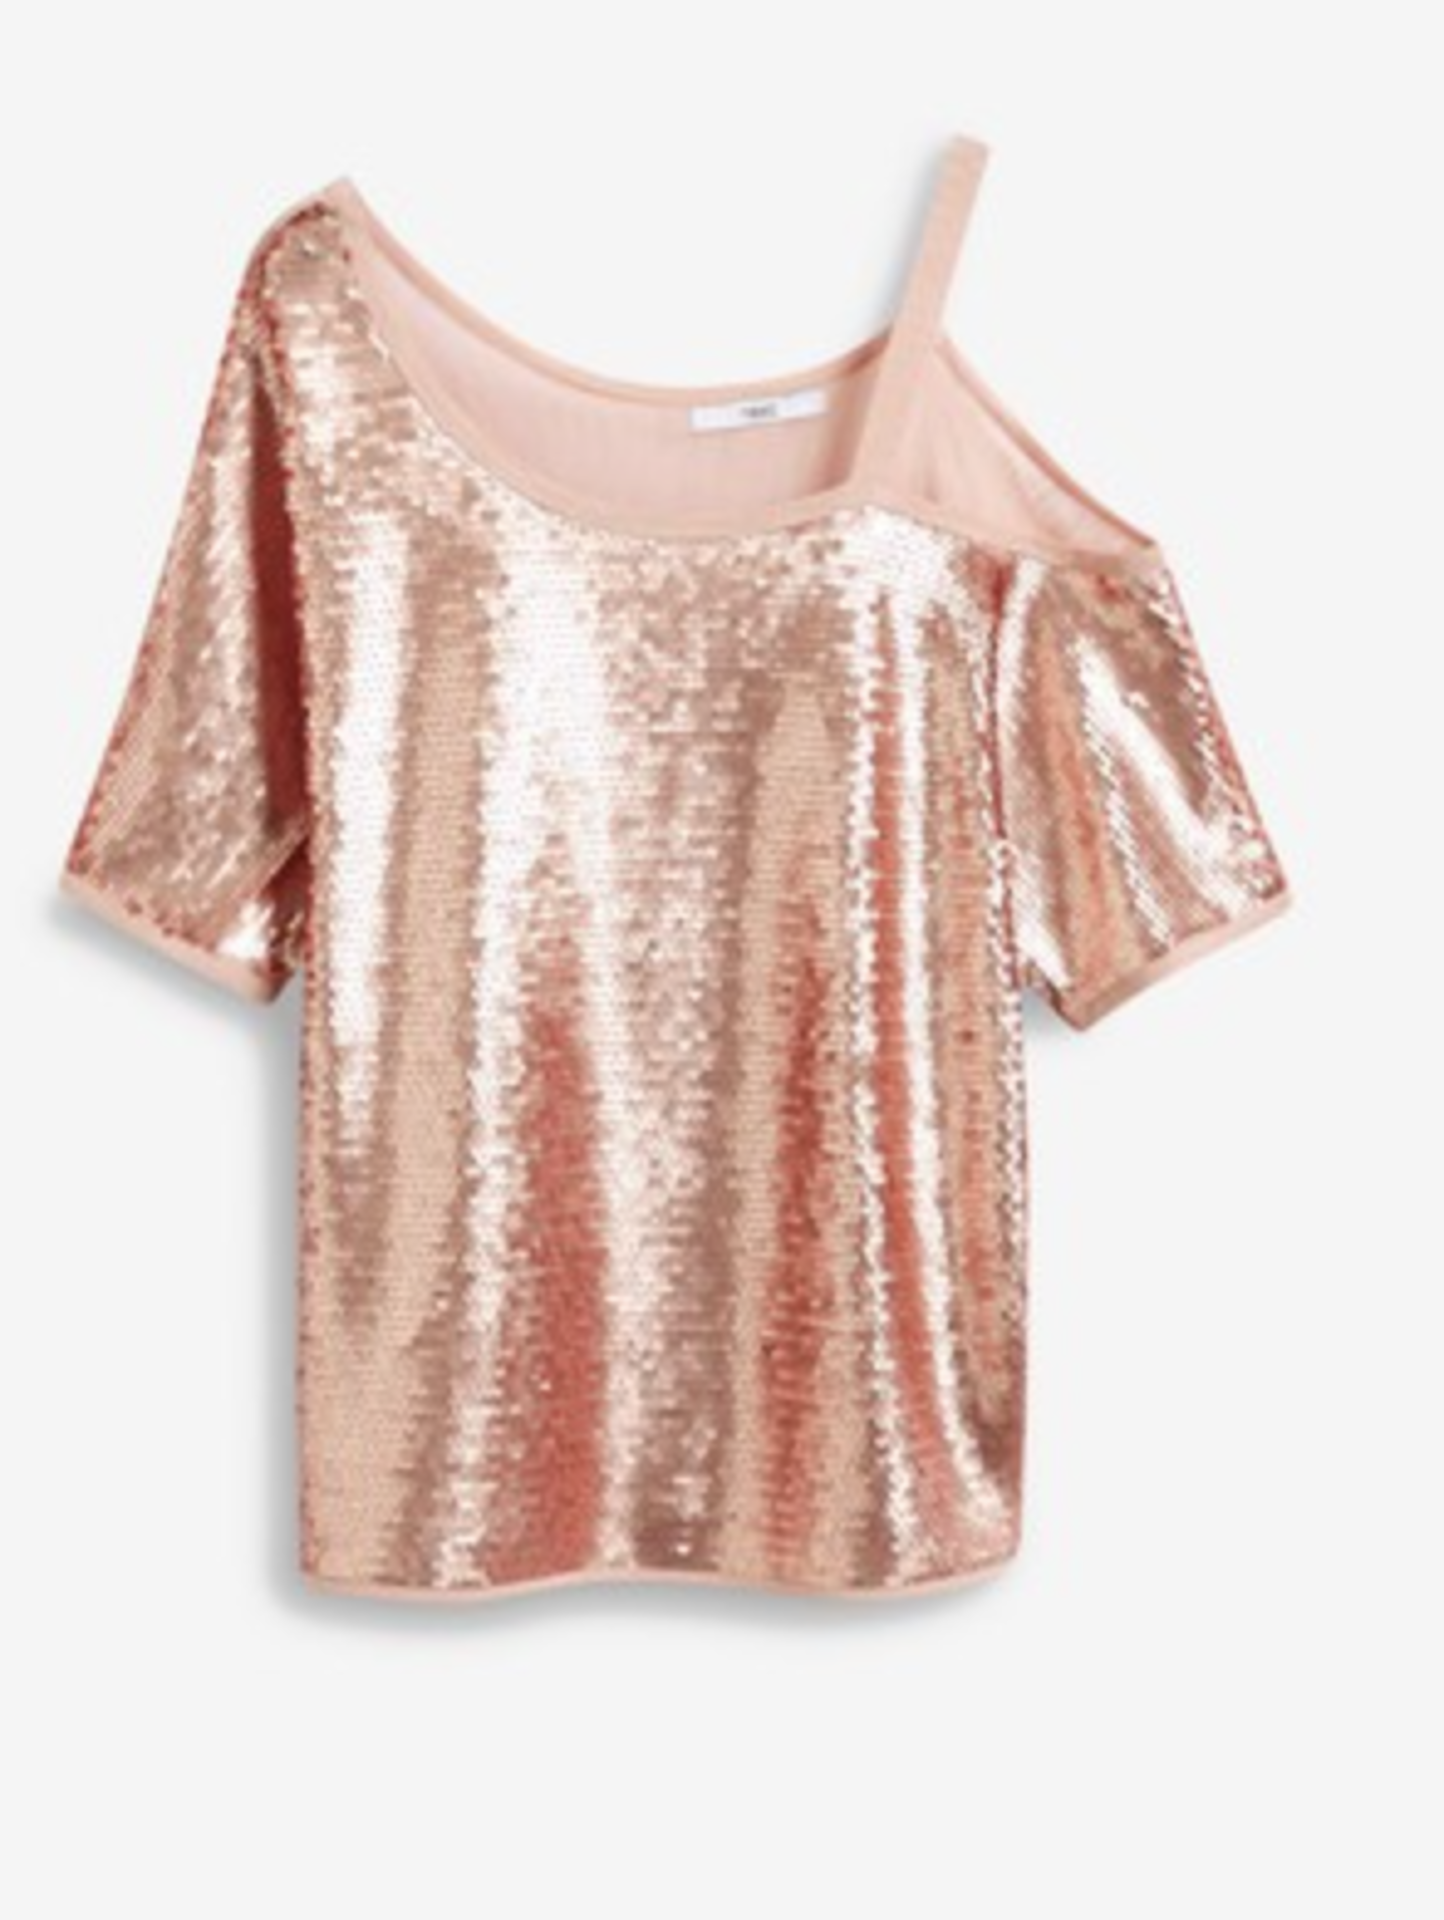 BRAND NEW - NEXT - Blush Sequin One Shoulder Top SIZE 14 RRP £35